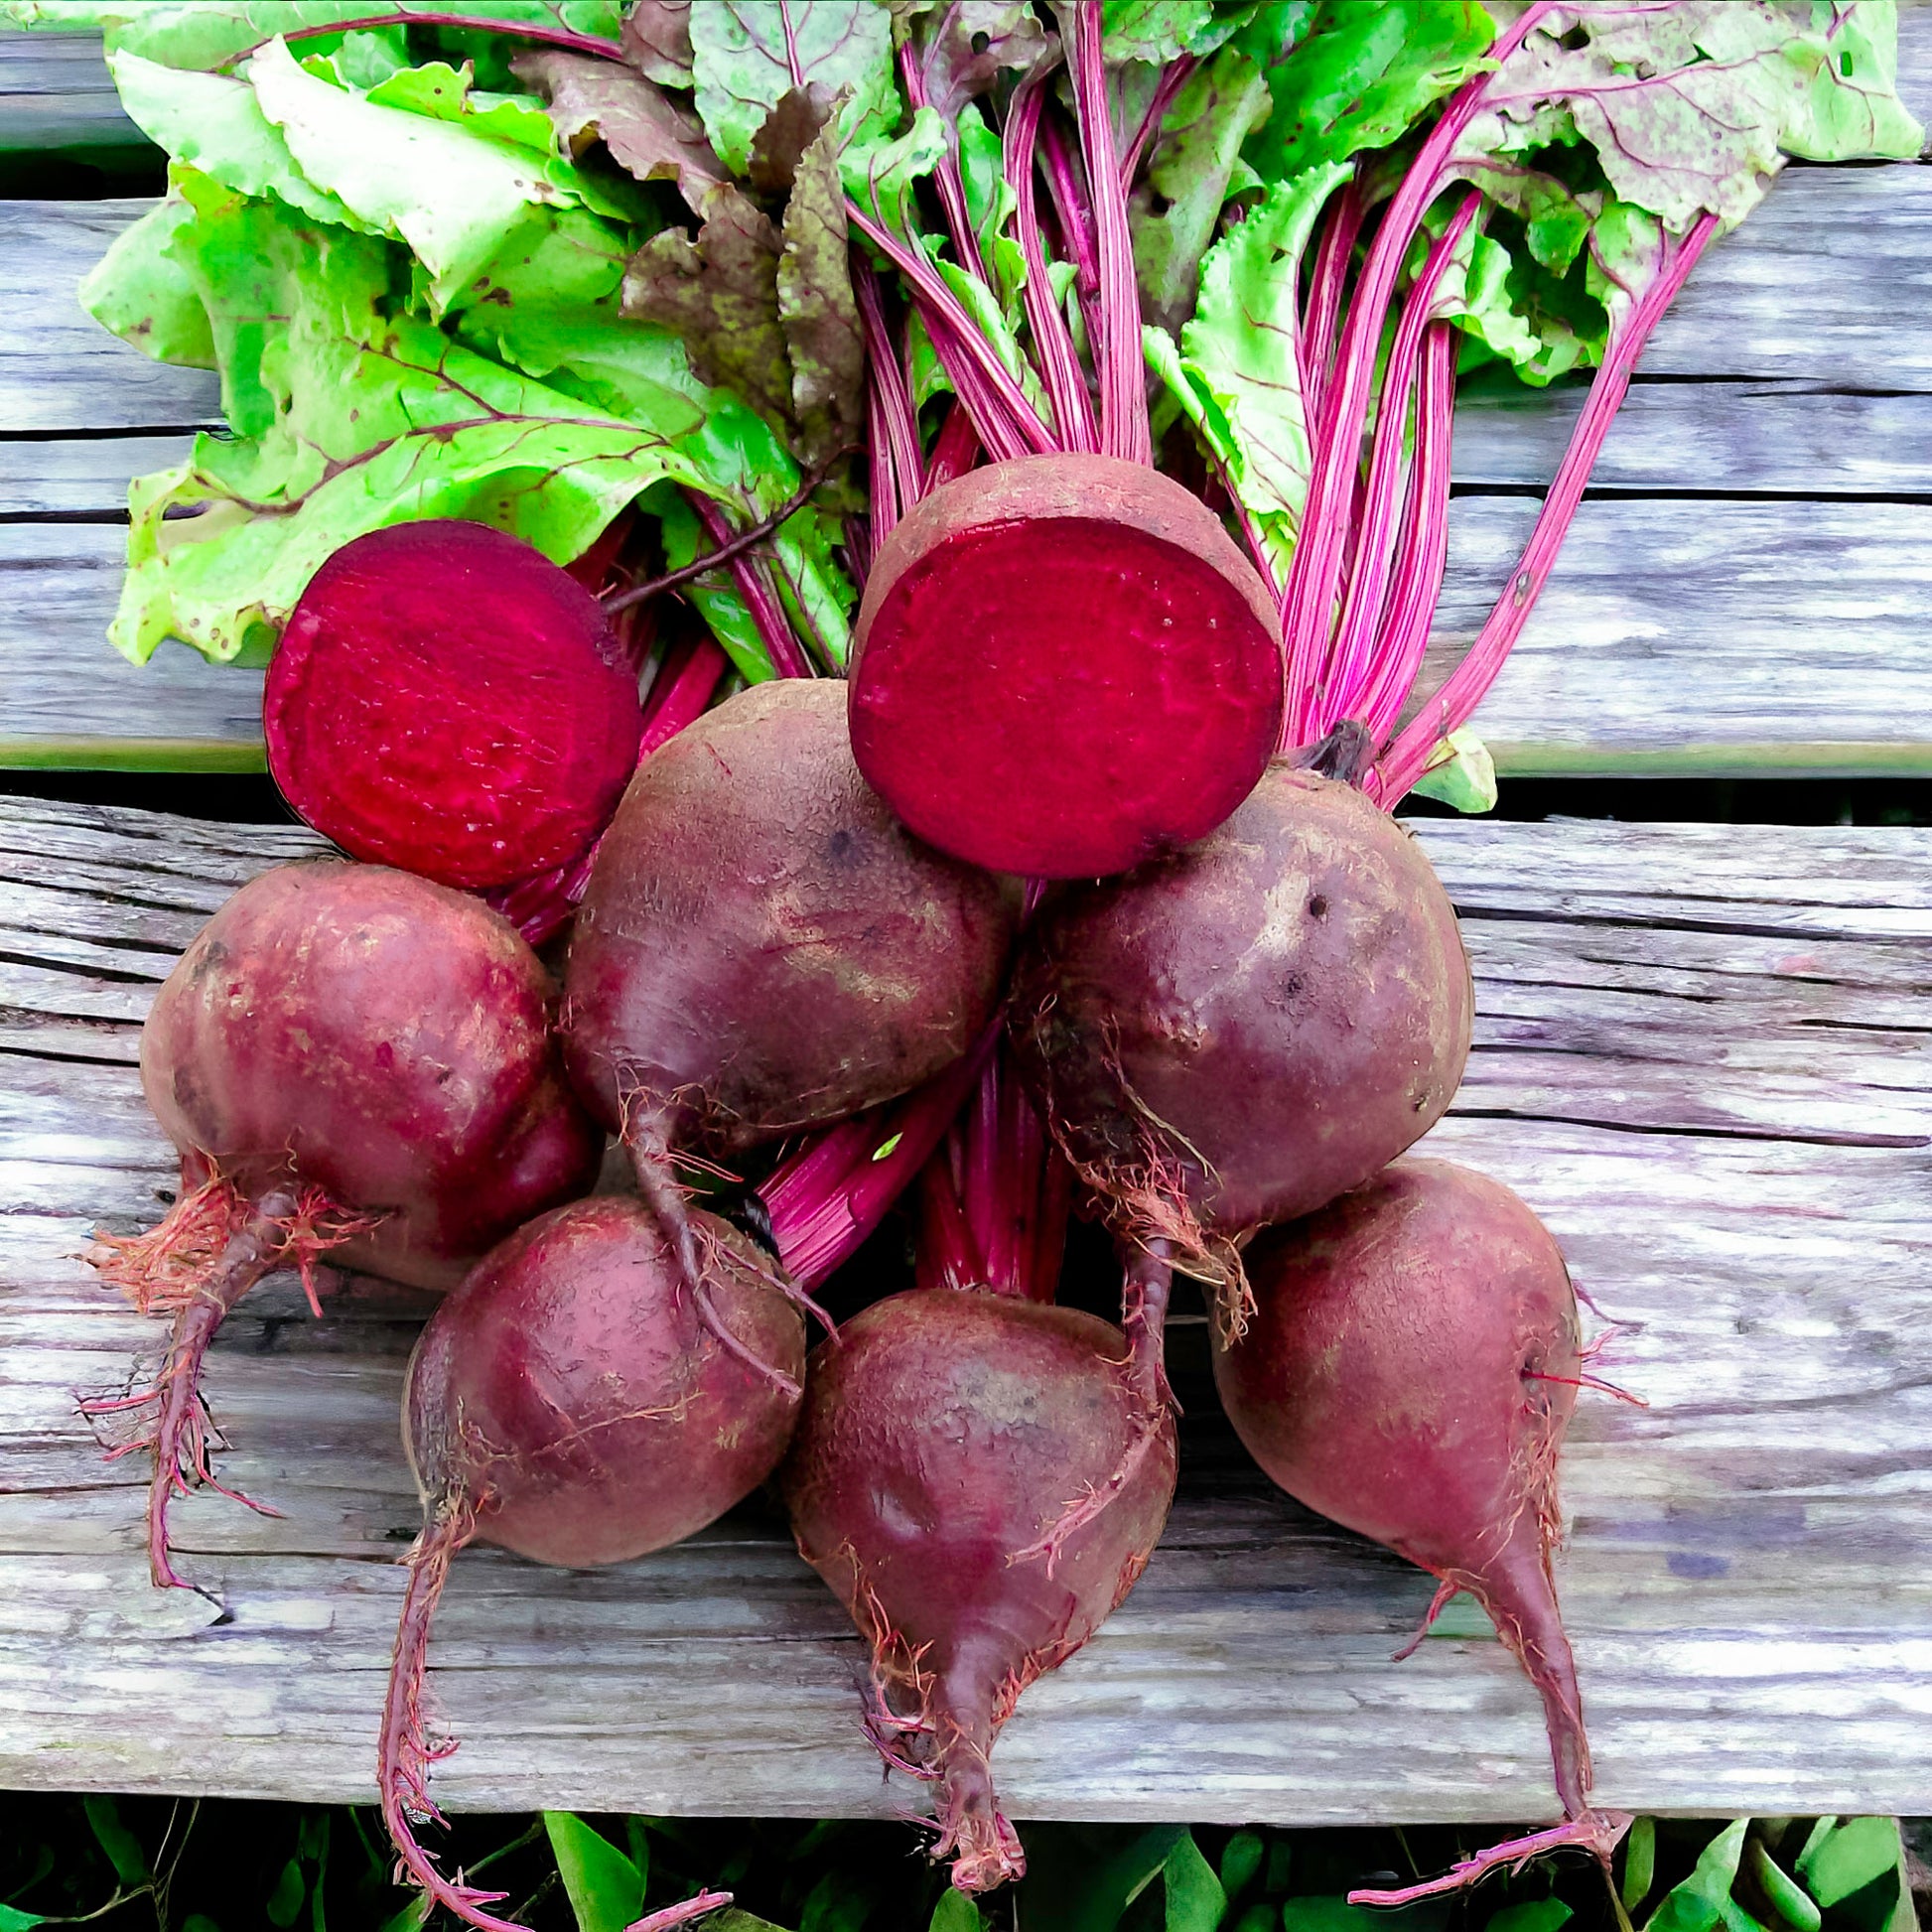 Heirloom Detroit Dark Red beets scattered on a wooden surface